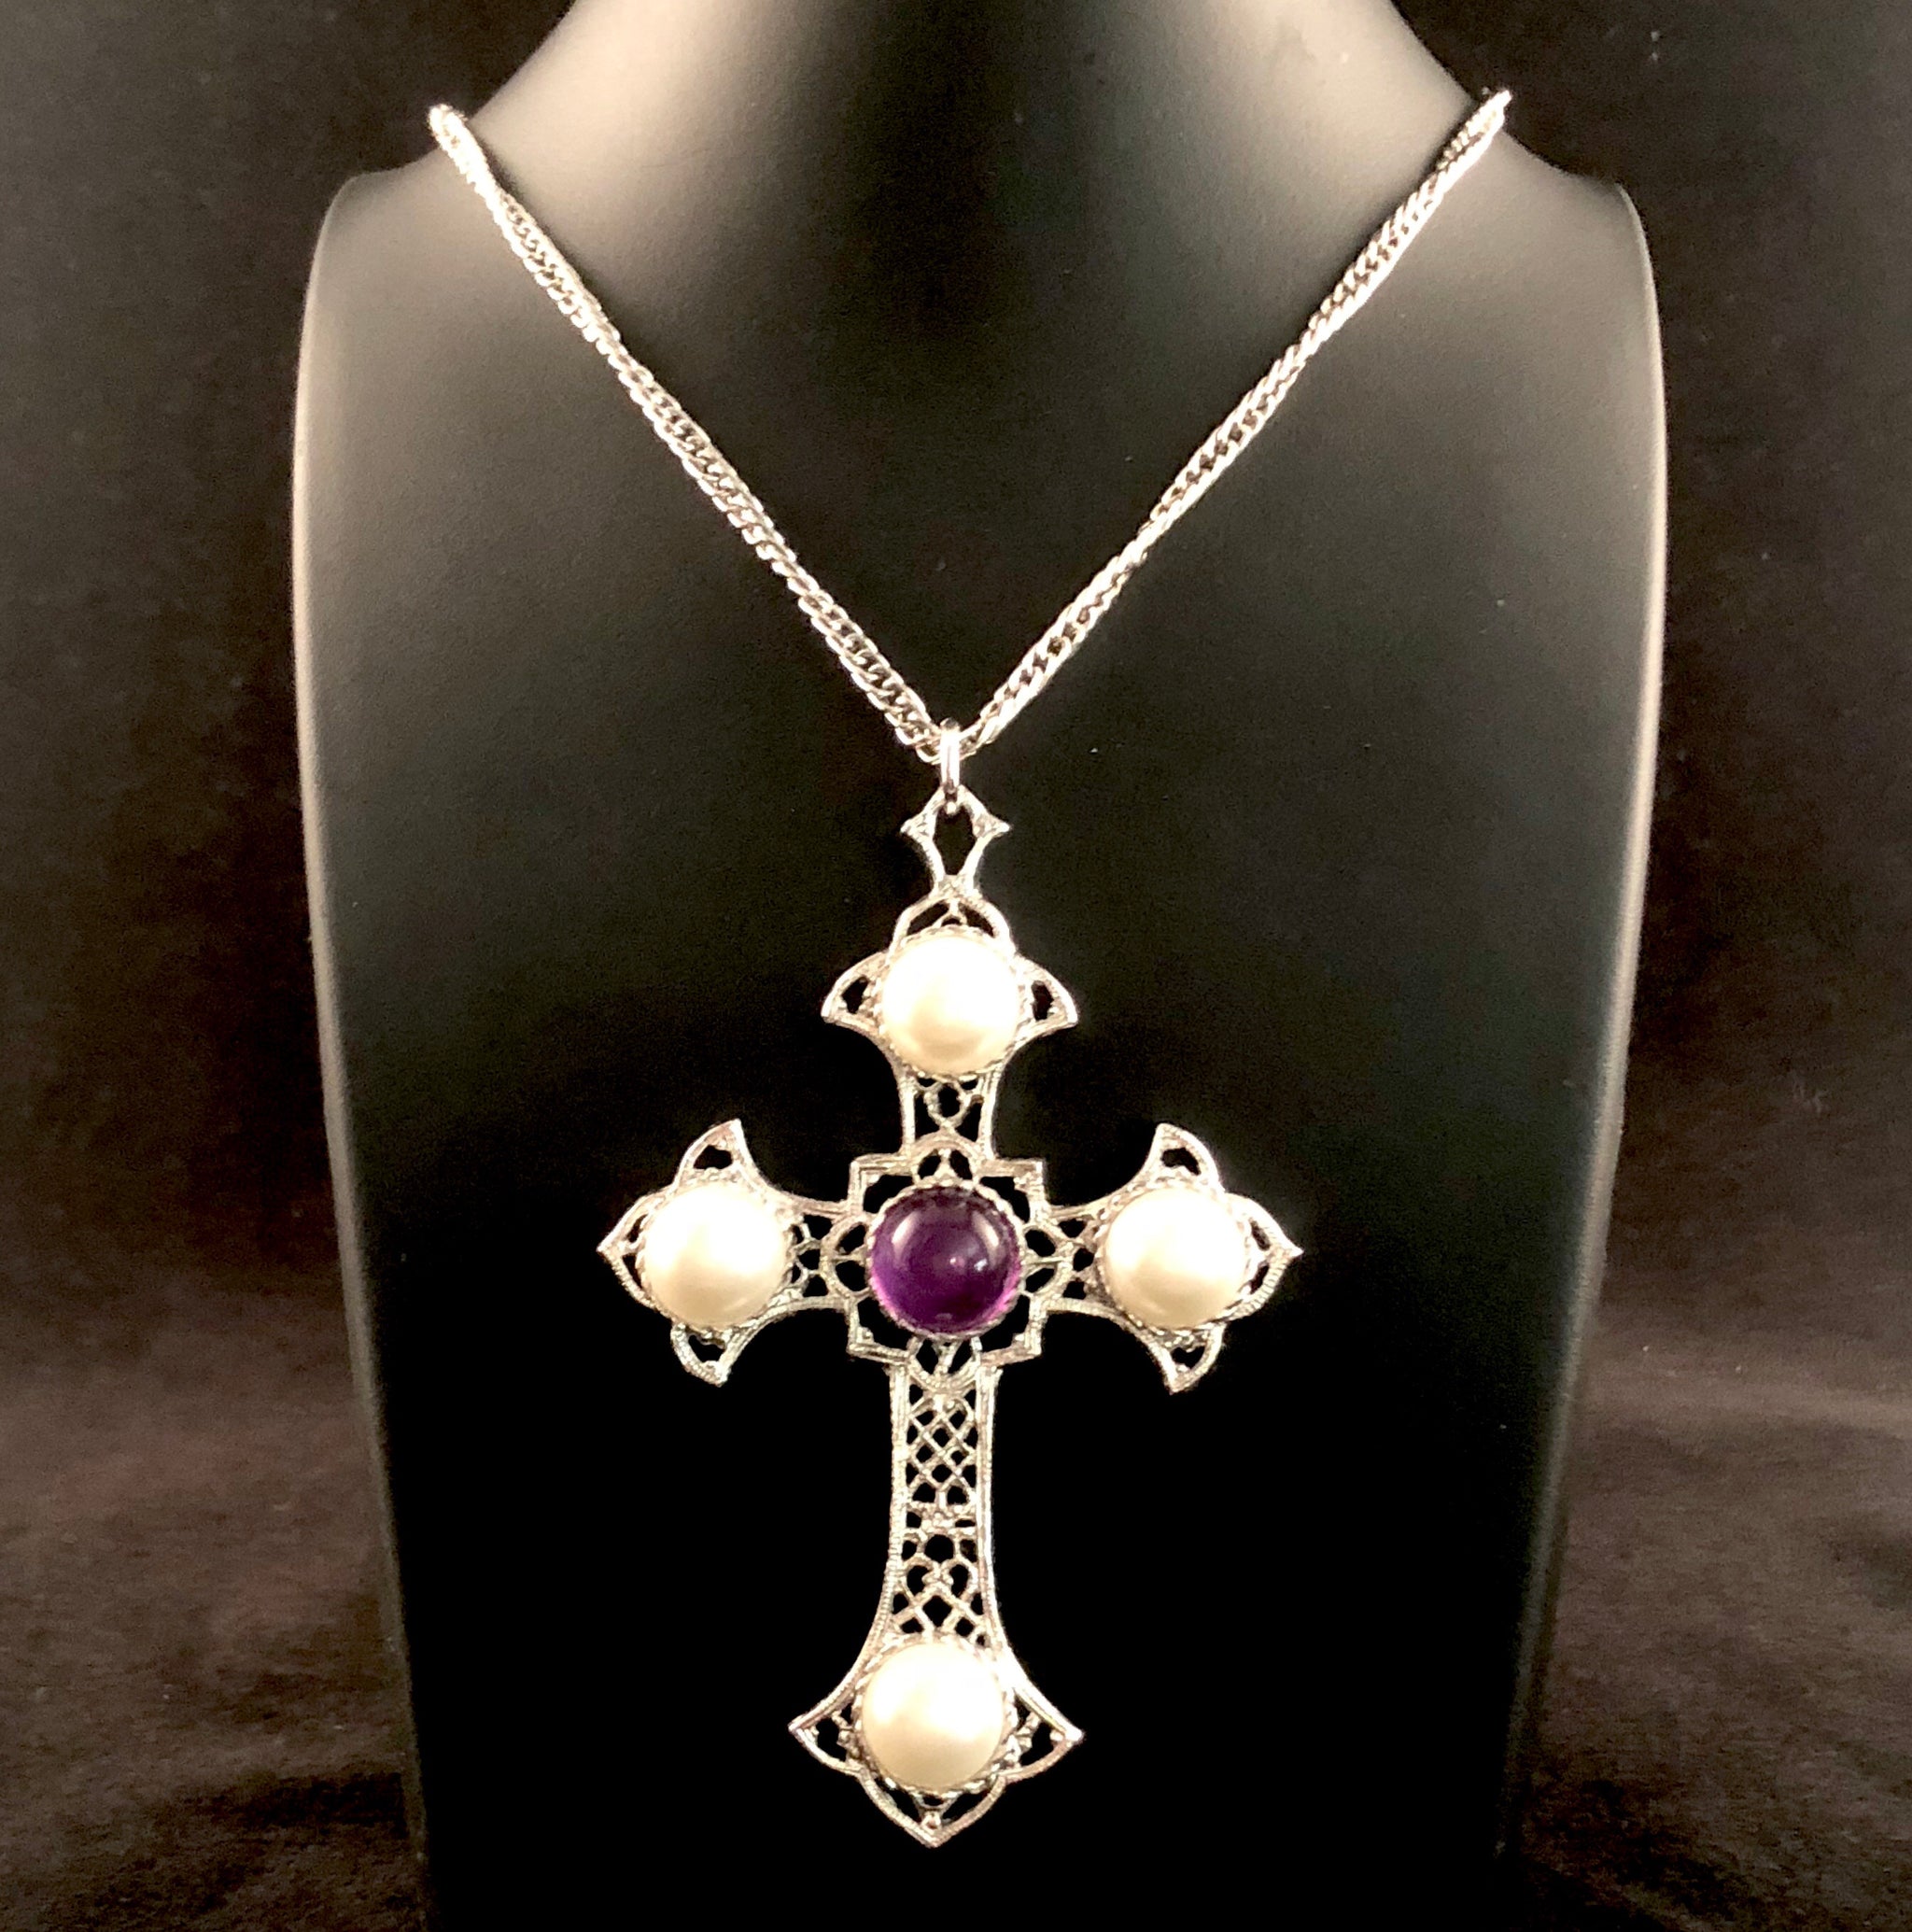 Early to Mid 70s Sarah Coventry Crusader Cross Necklace in Original Bo ...